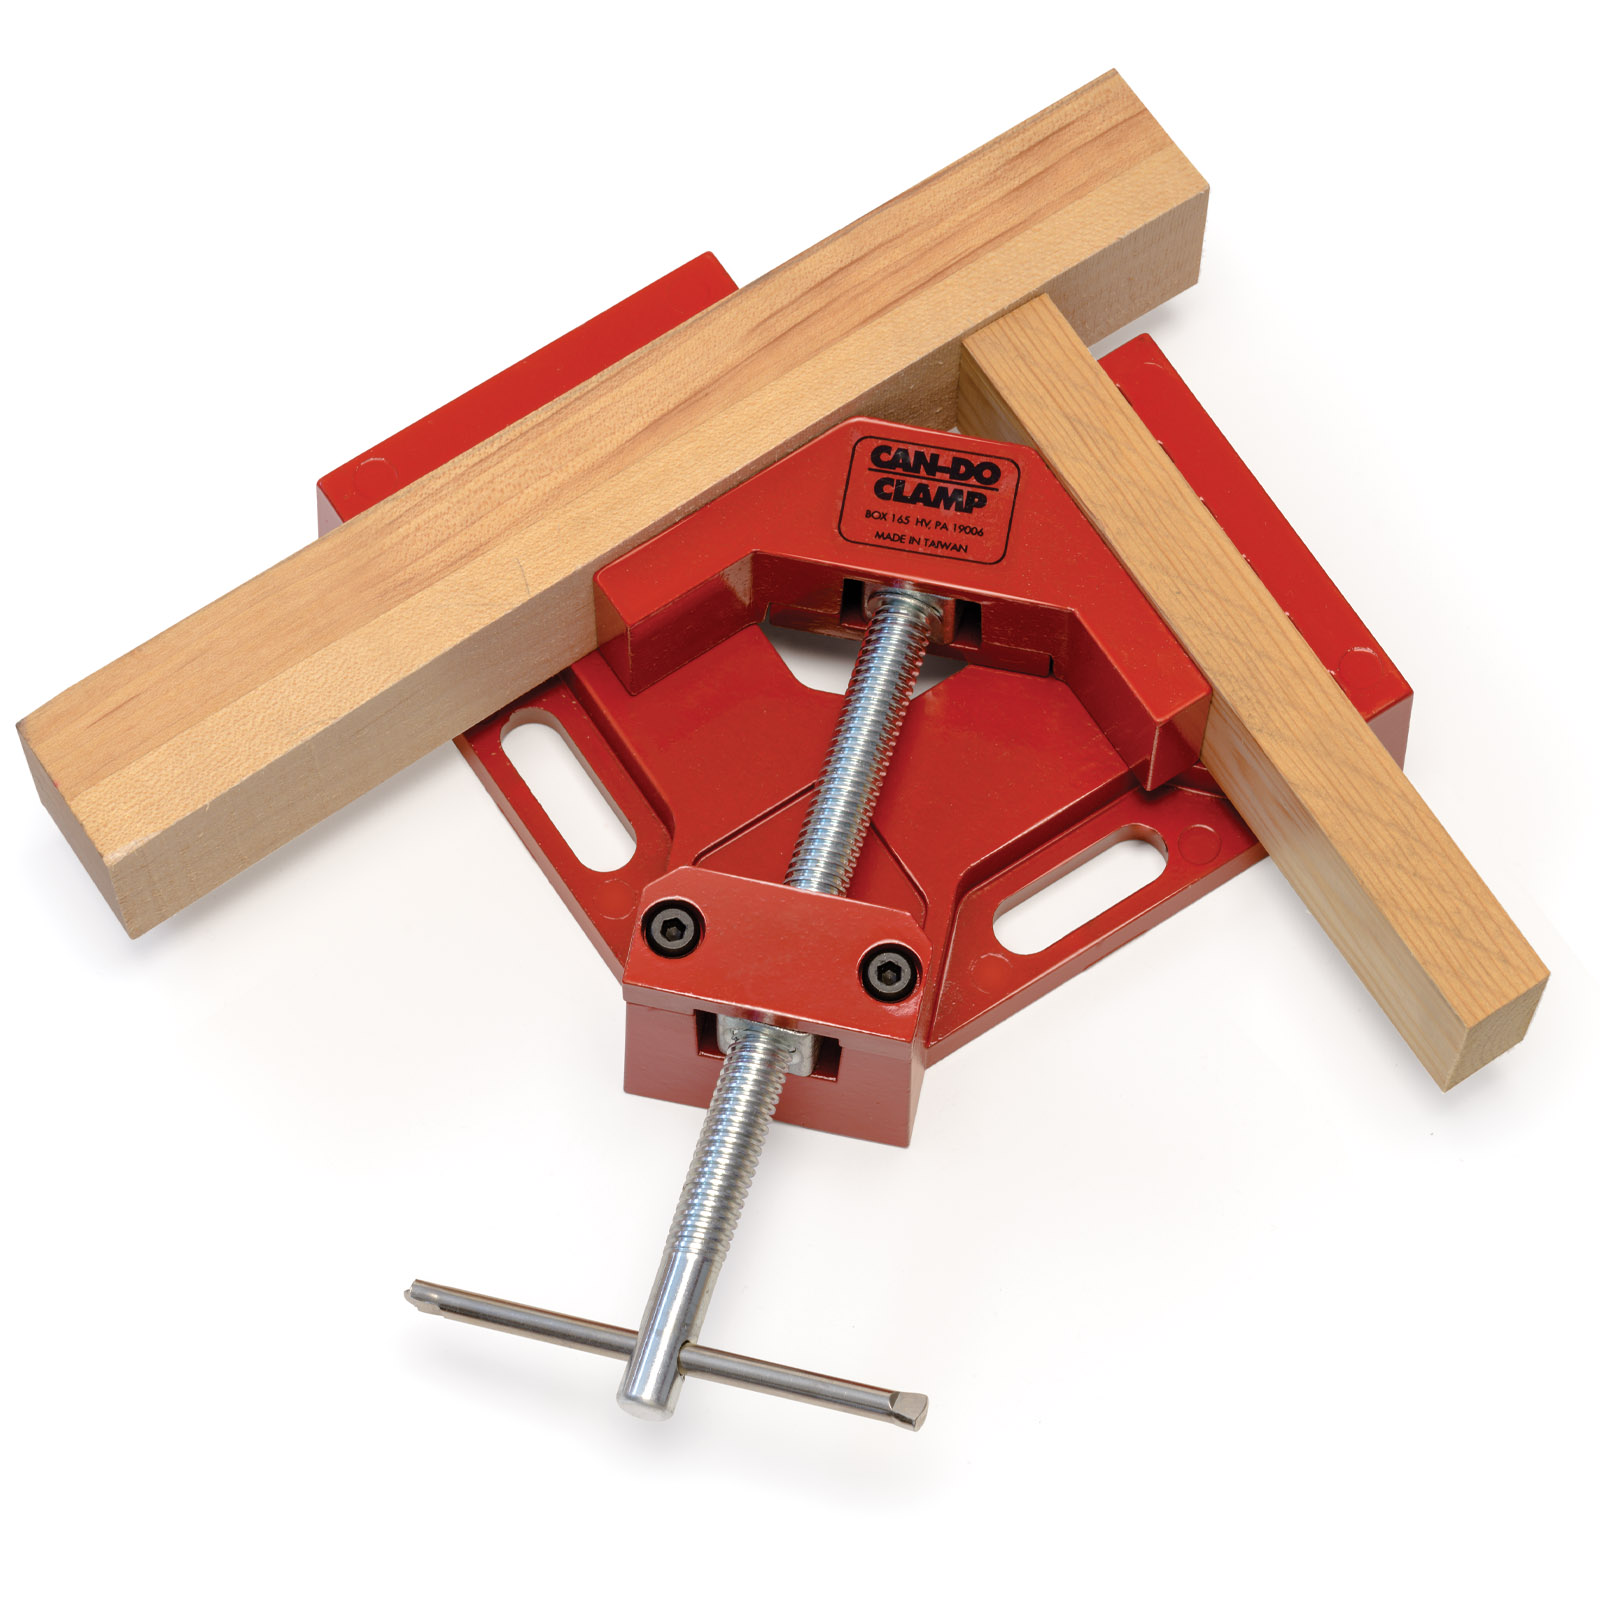 MLCS Woodworking Can-Do Corner Clamp and Vise